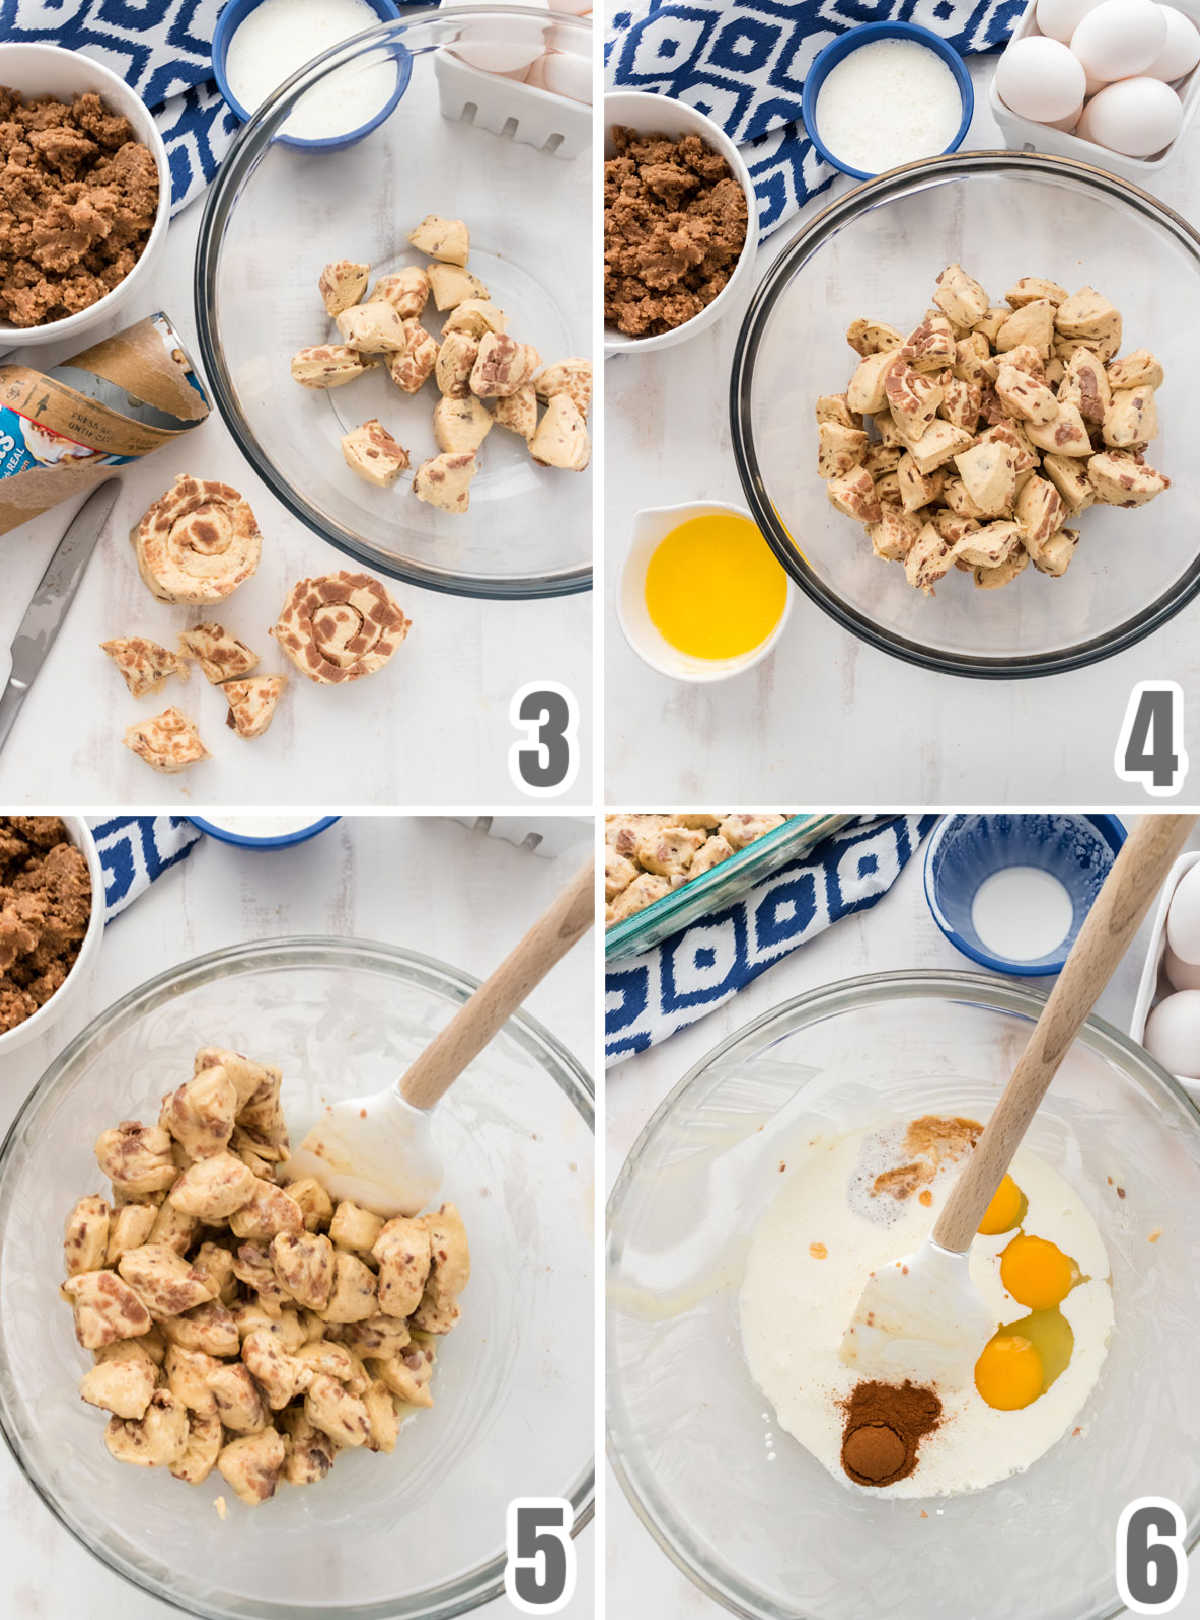 Collage image showing the steps for preparing the store-bought Cinnamon  rolls to be used in the breakfast casserole.